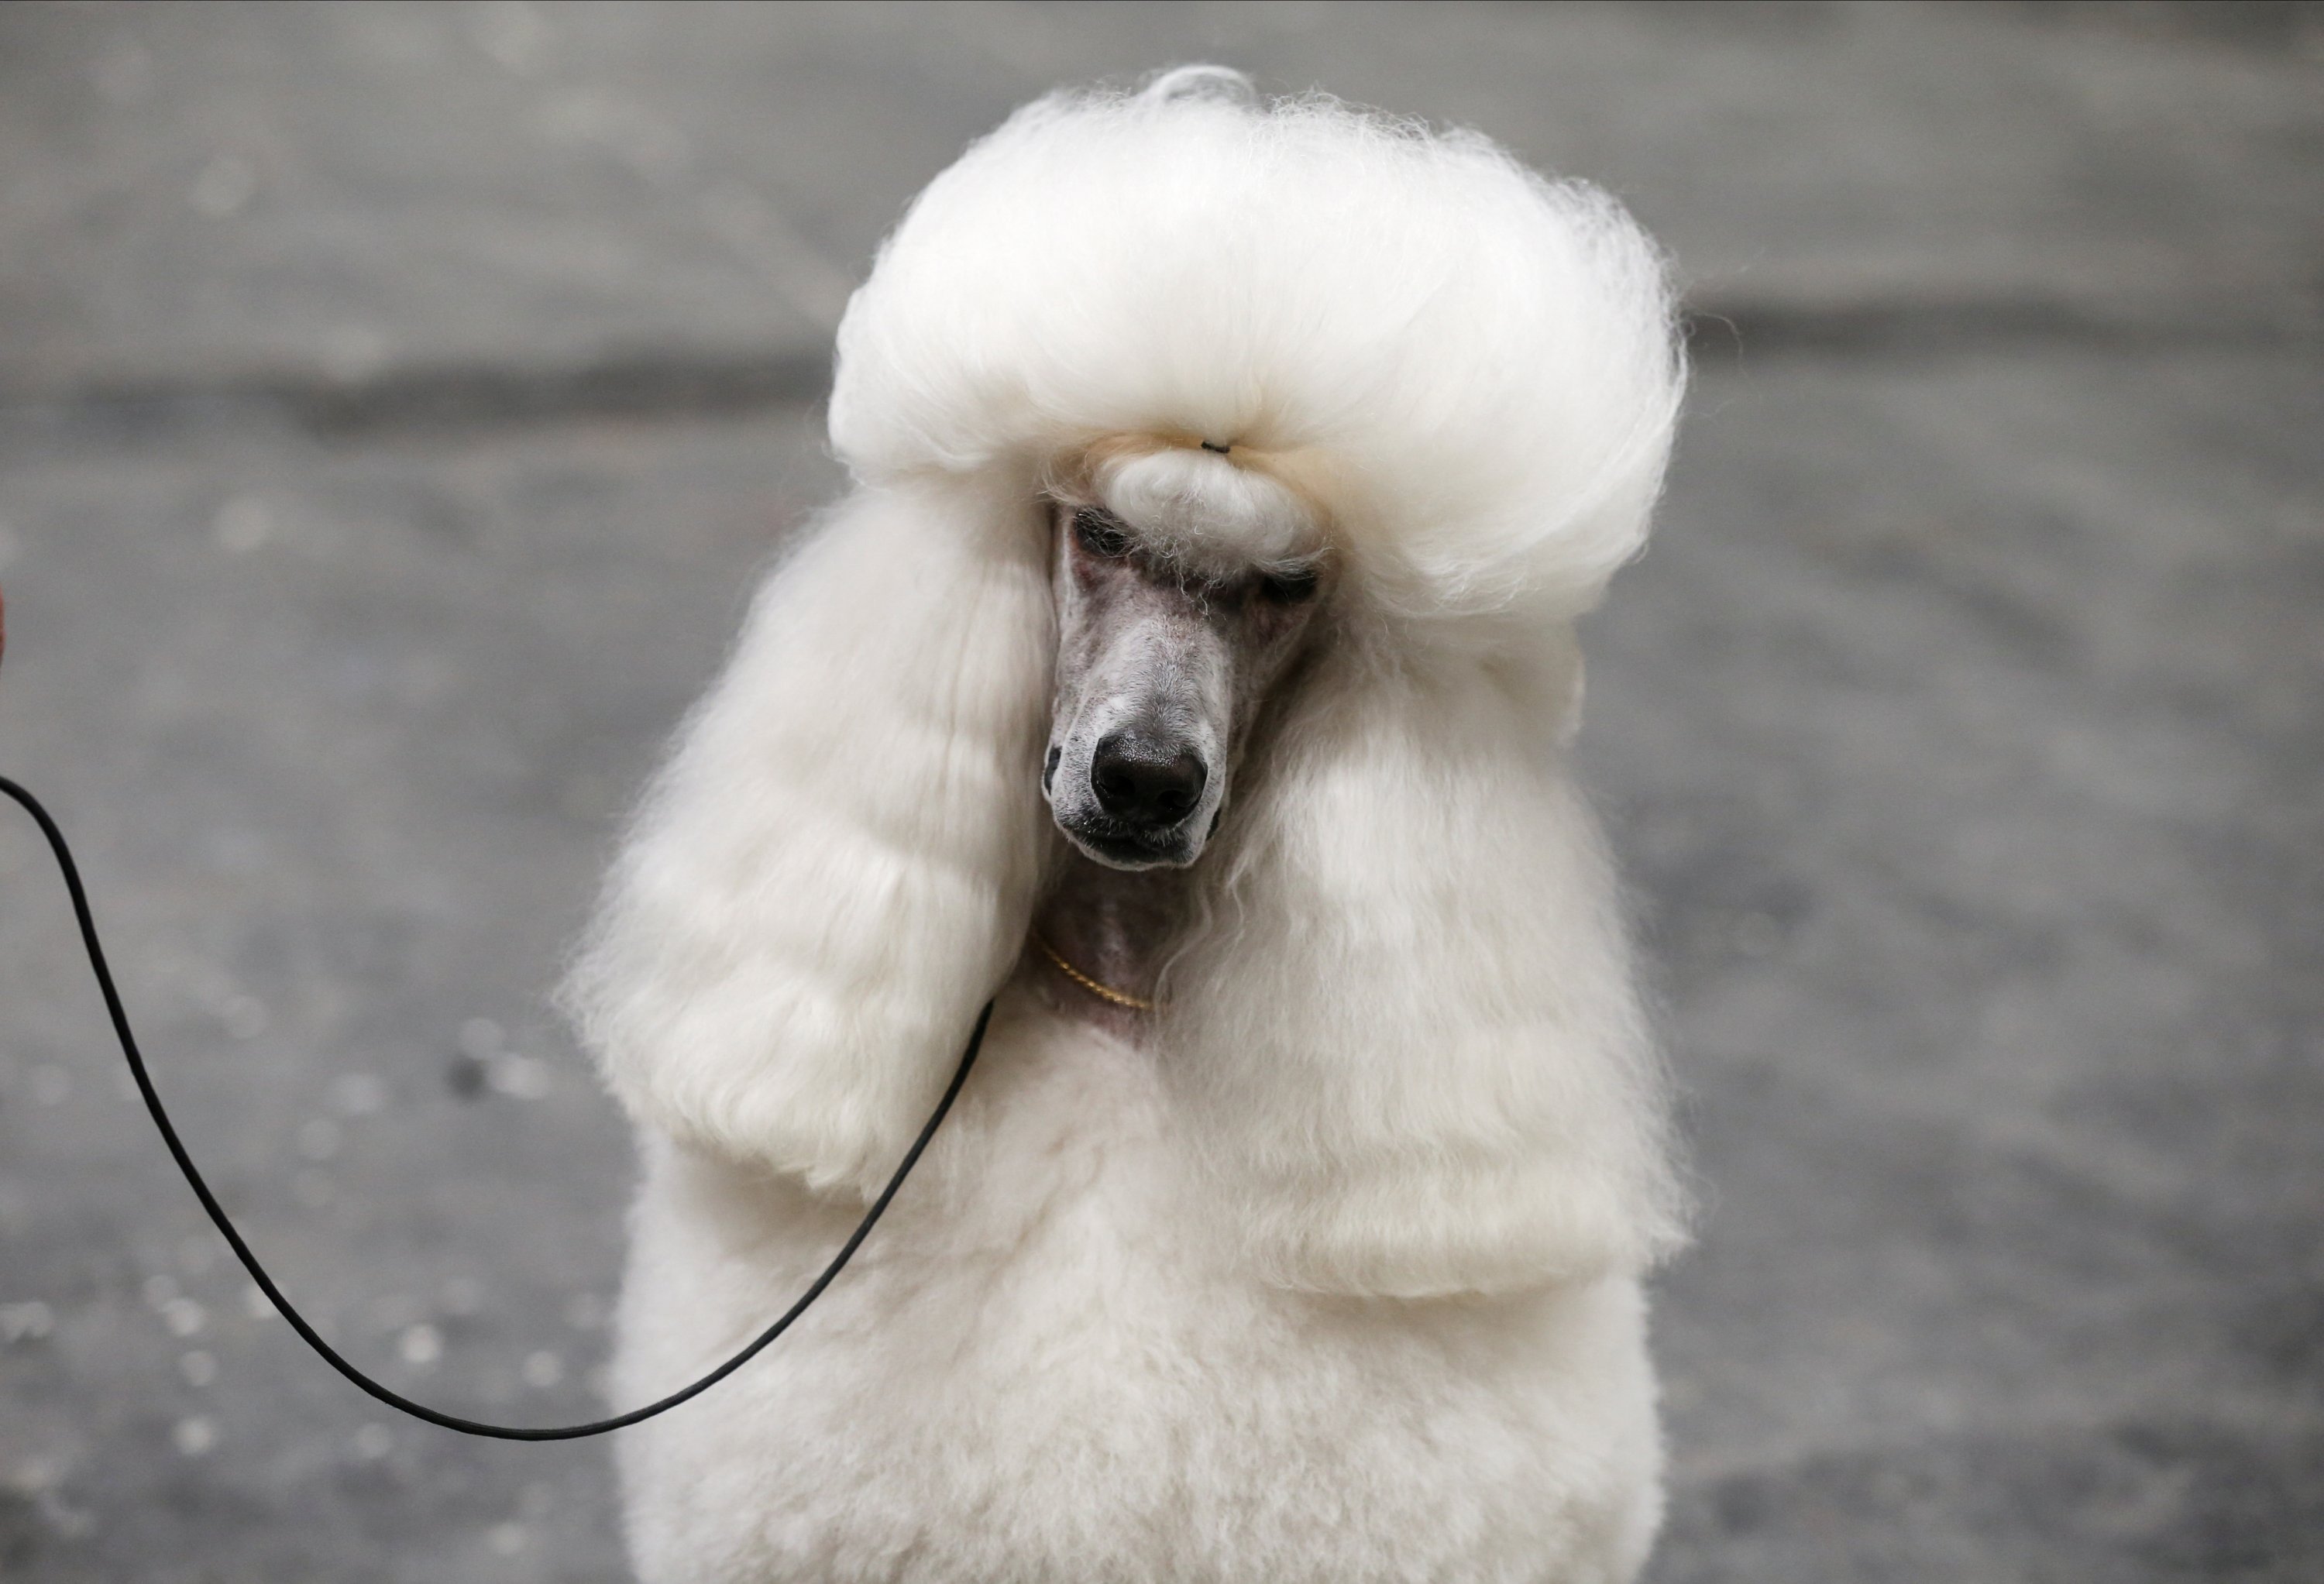 A standard poodle waits before competing at the World Dog Show 2022, where more than 15,000 dogs from around the world are expected, at the IFEMA conference center in Madrid, Spain, June 23, 2022. (Photo Reuters)